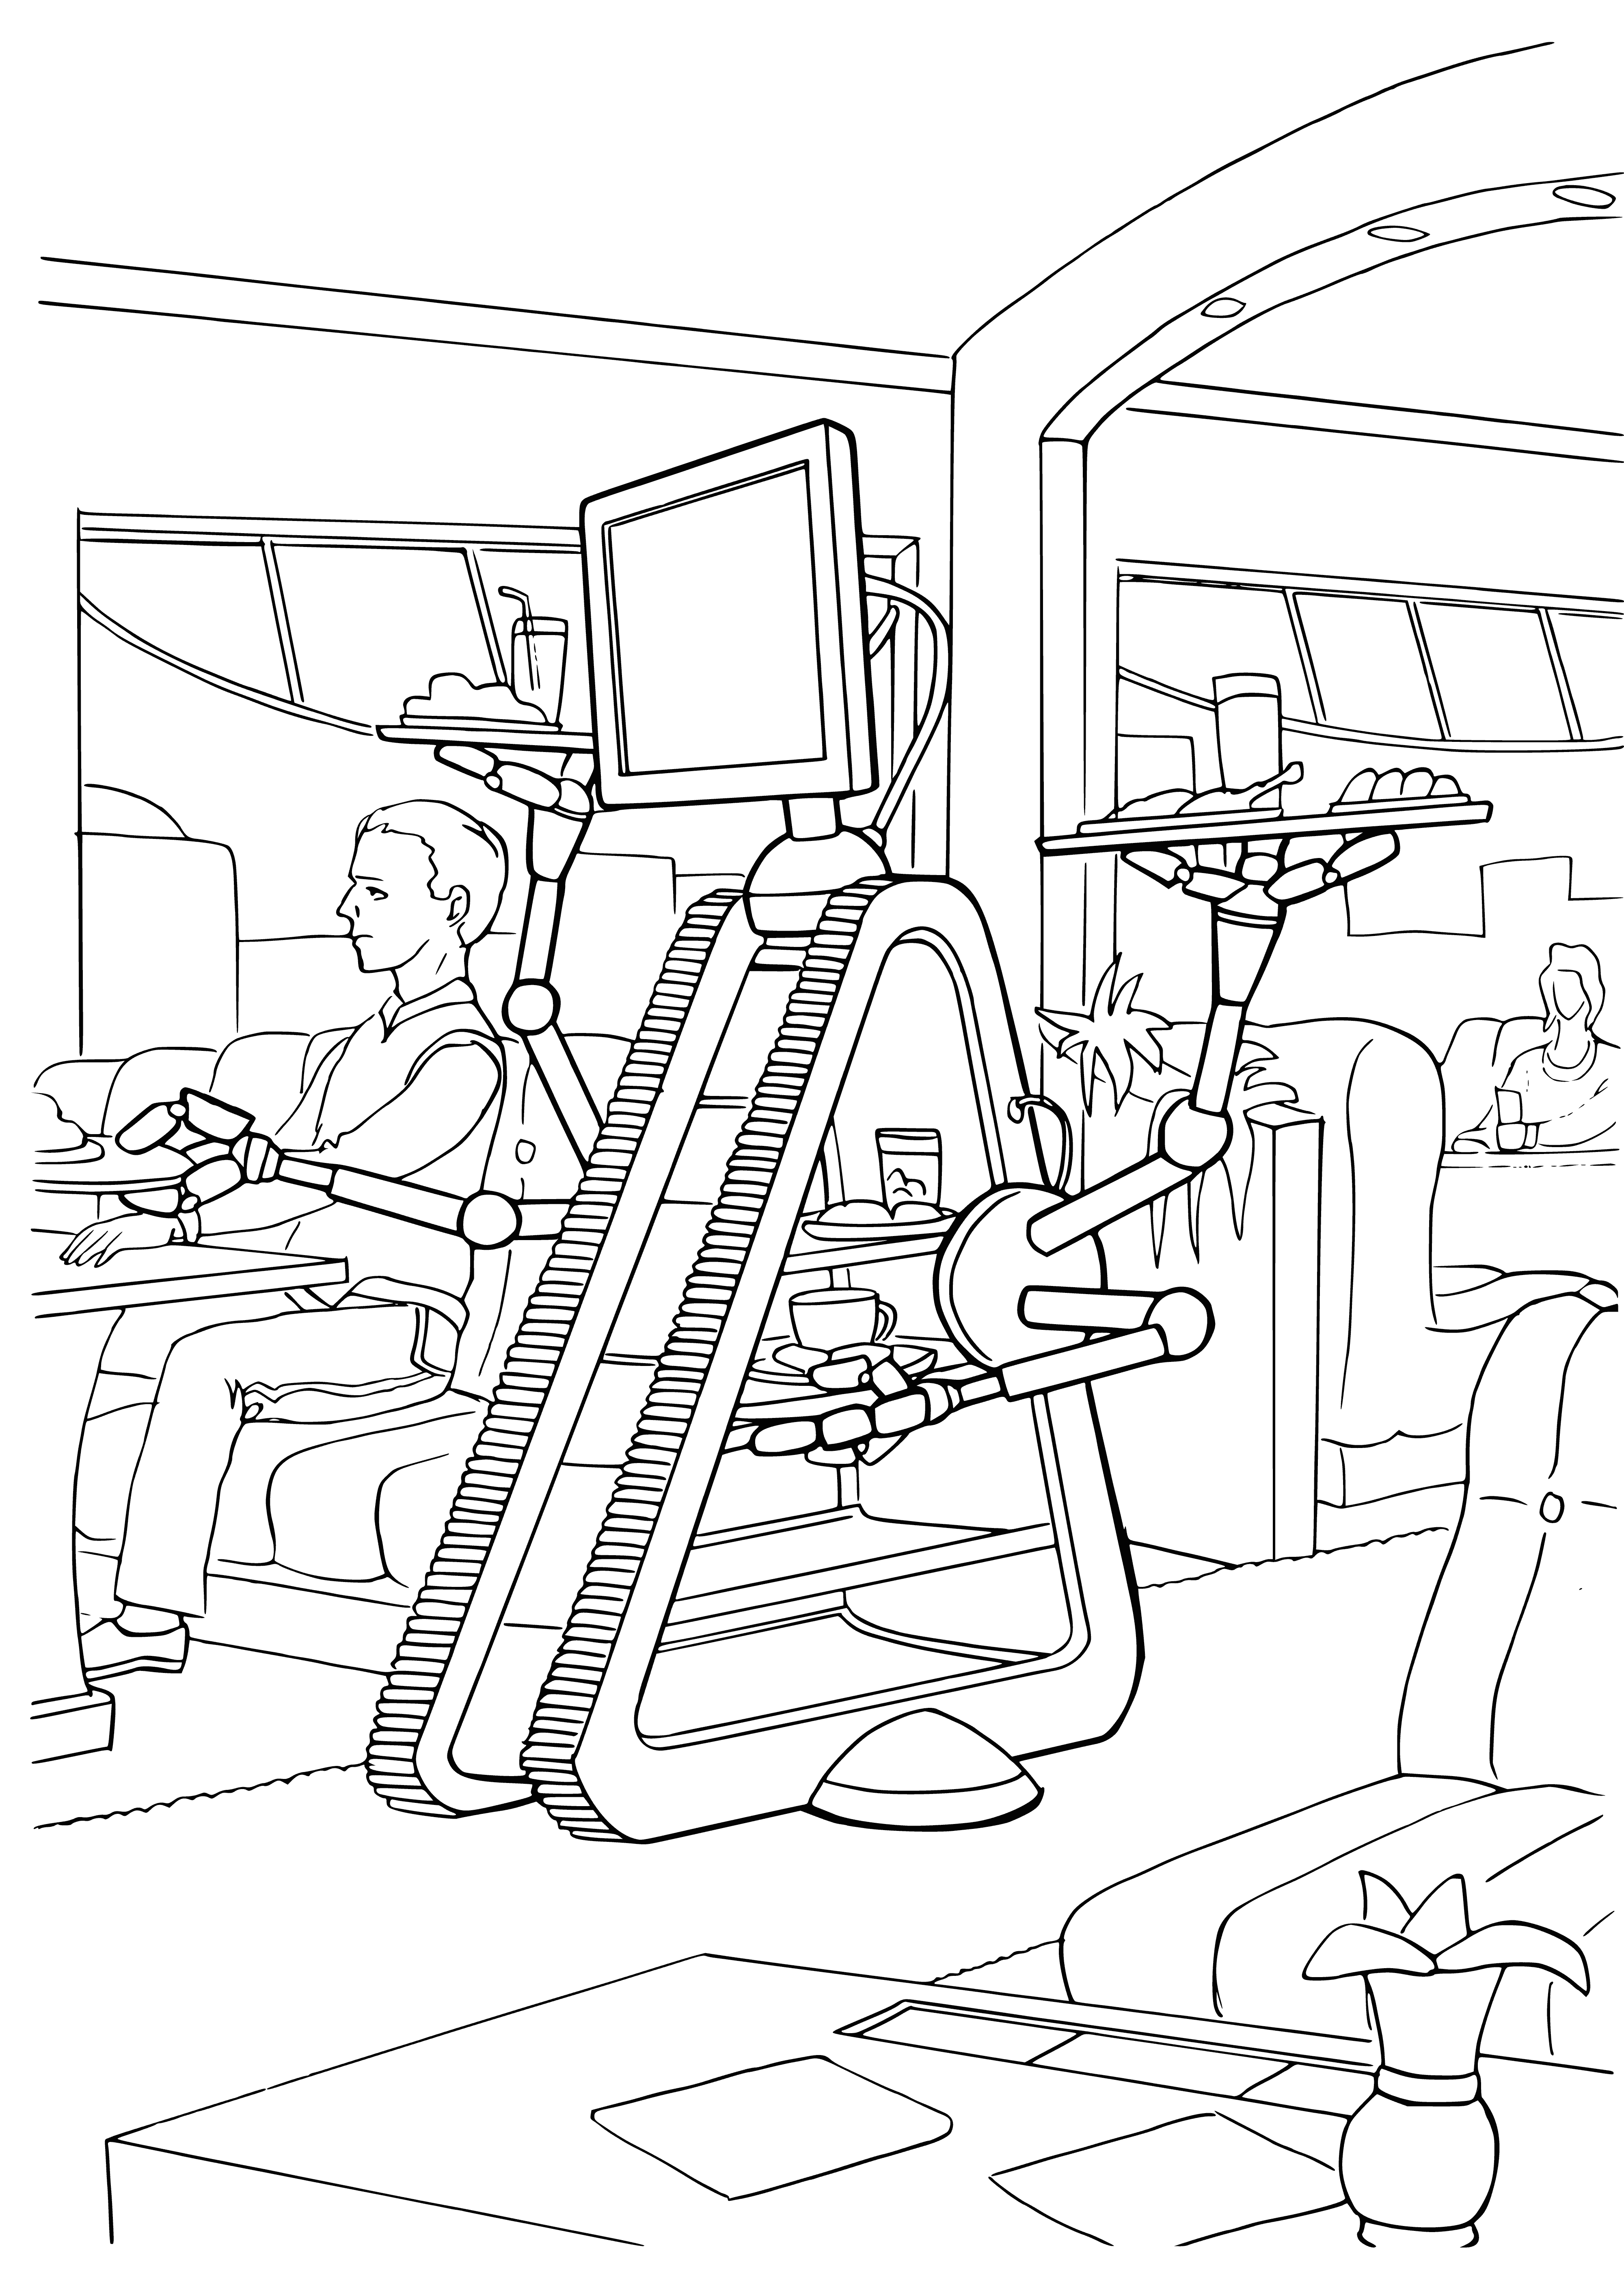 coloring page: Robot waiters with trays, scanners, & AI in restaurants of the future for faster, efficient, & accurate service.